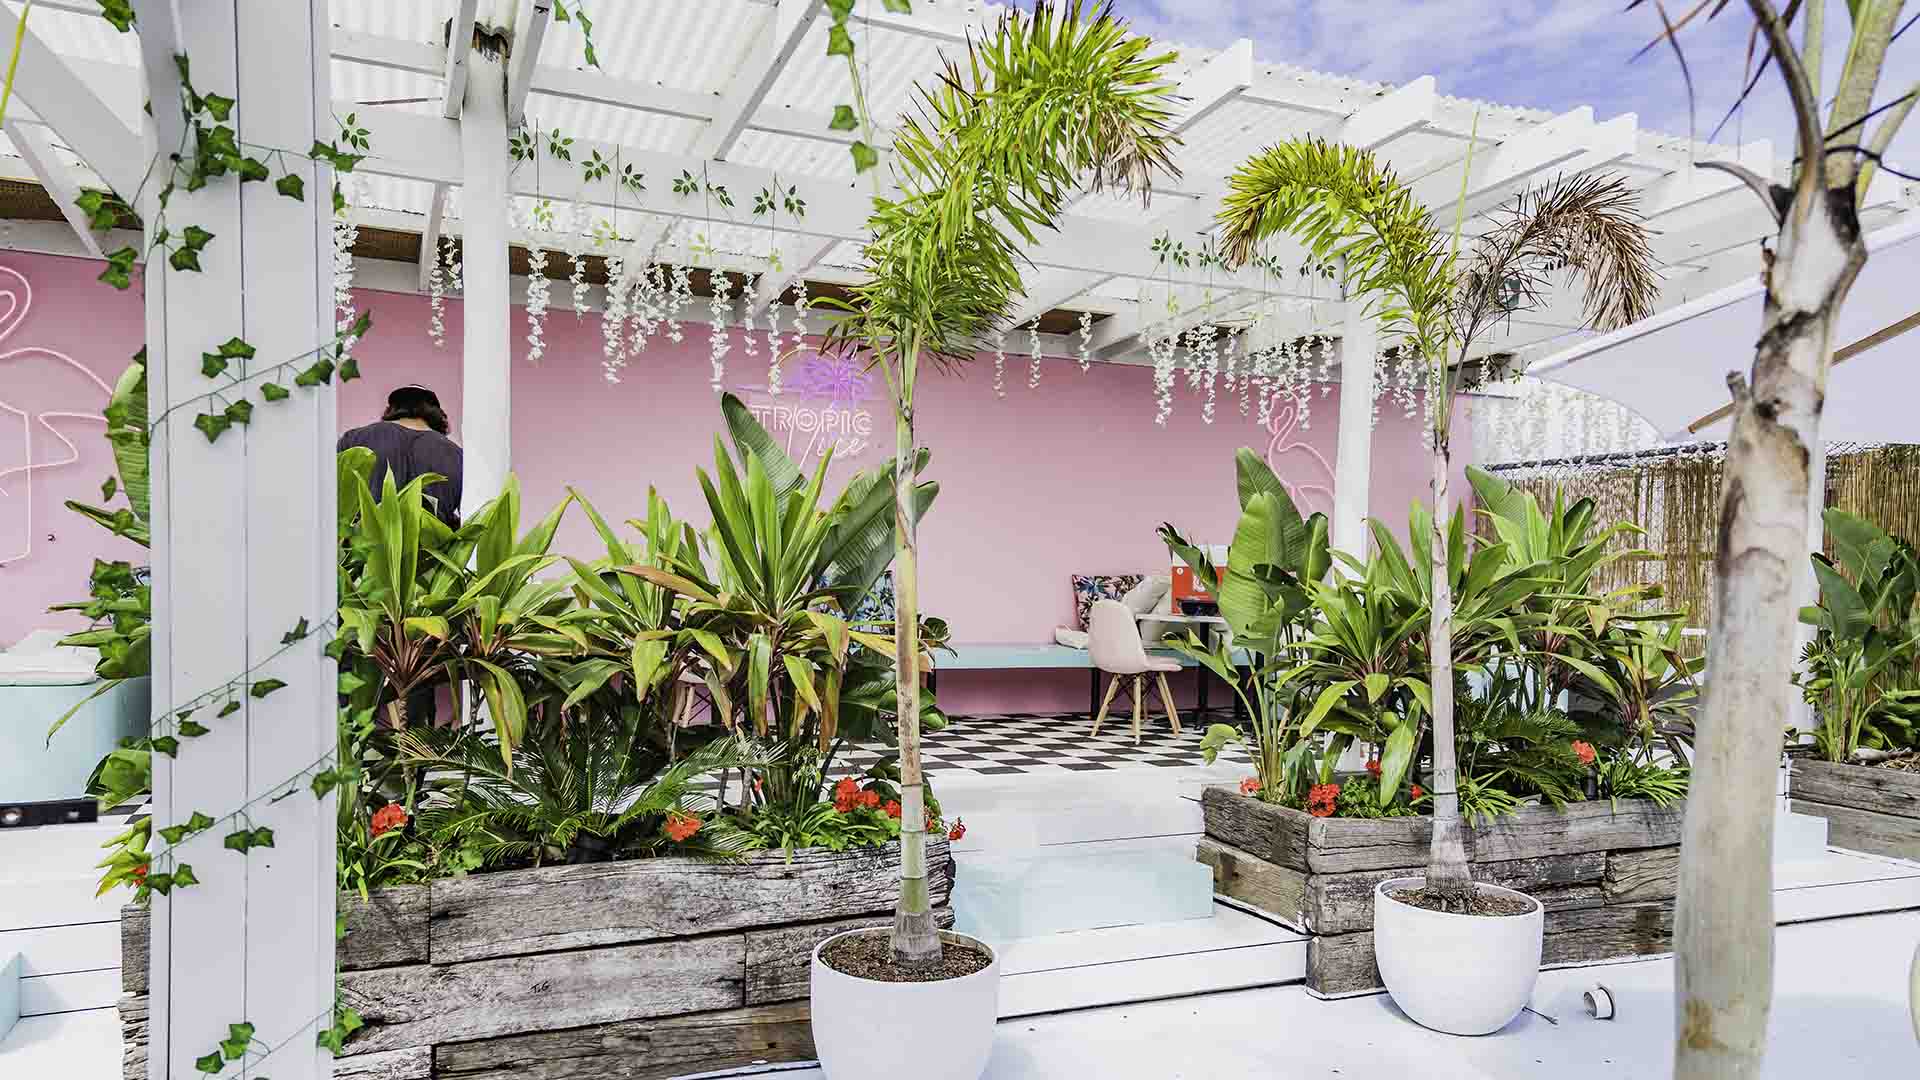 Tropic Vice Is Mermaid Beach's New Pastel-Heavy, Palm Springs and Miami-Inspired Rooftop Bar